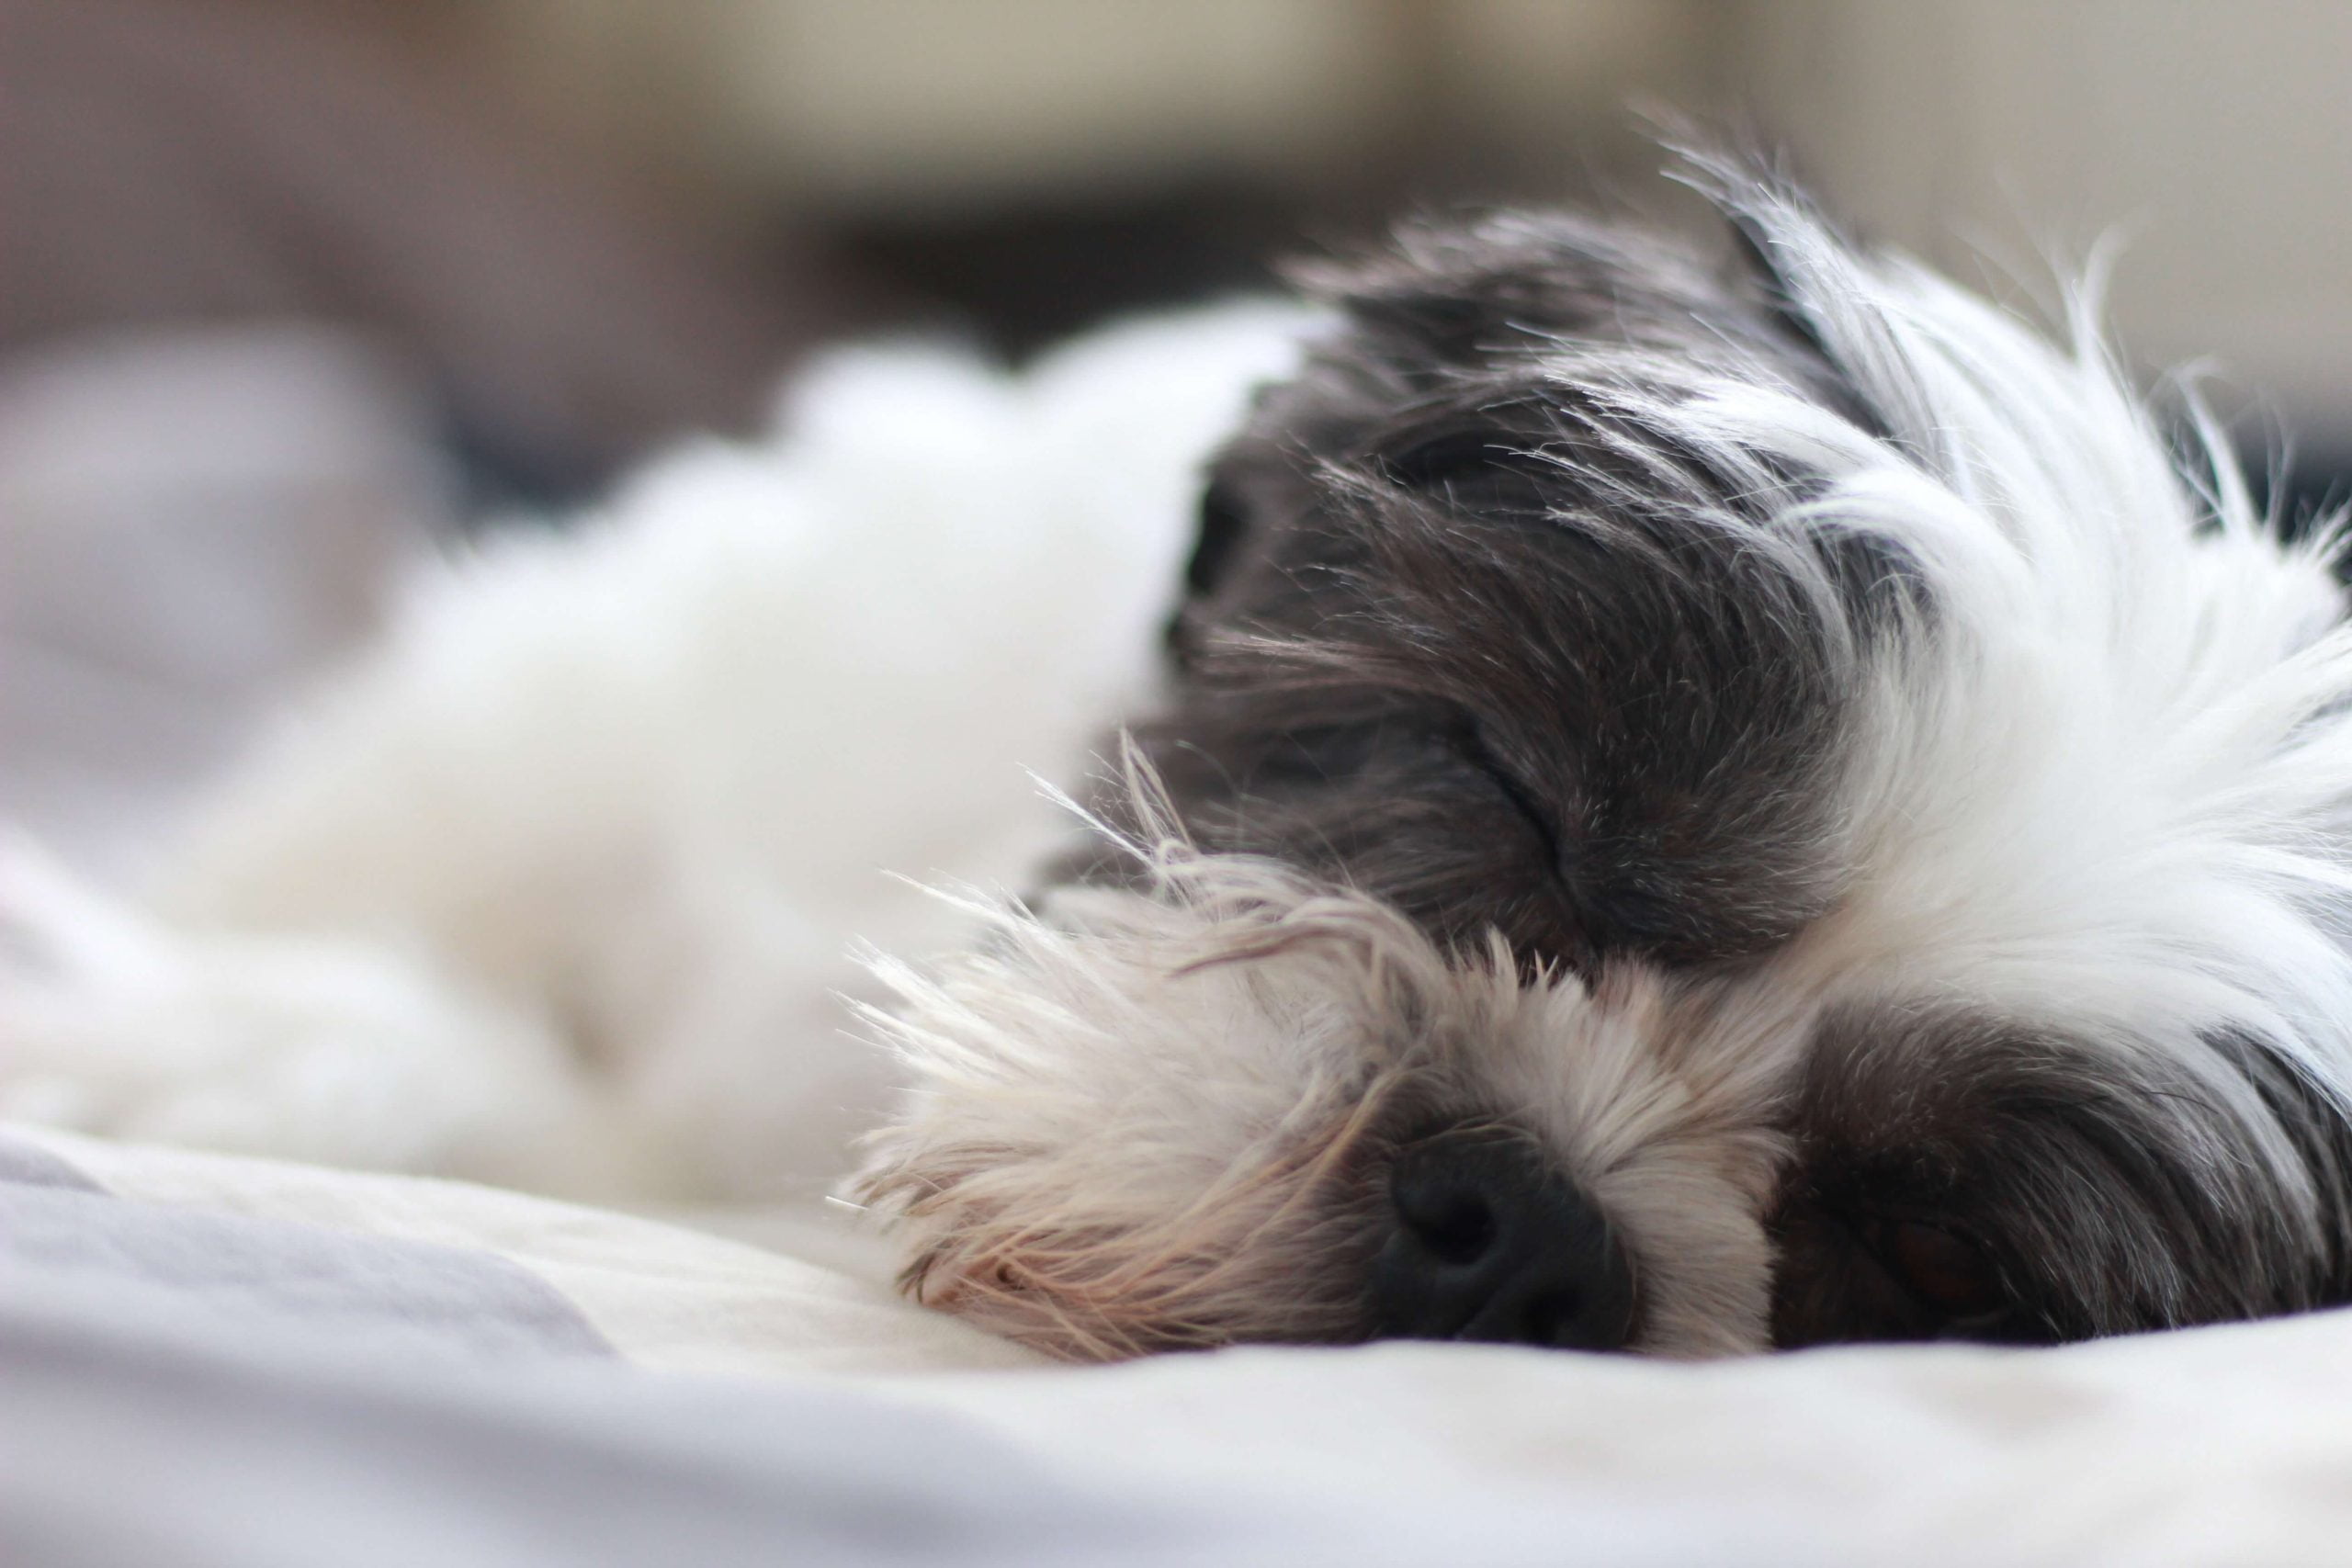 How are digestive problems in Shih Tzu diagnosed?